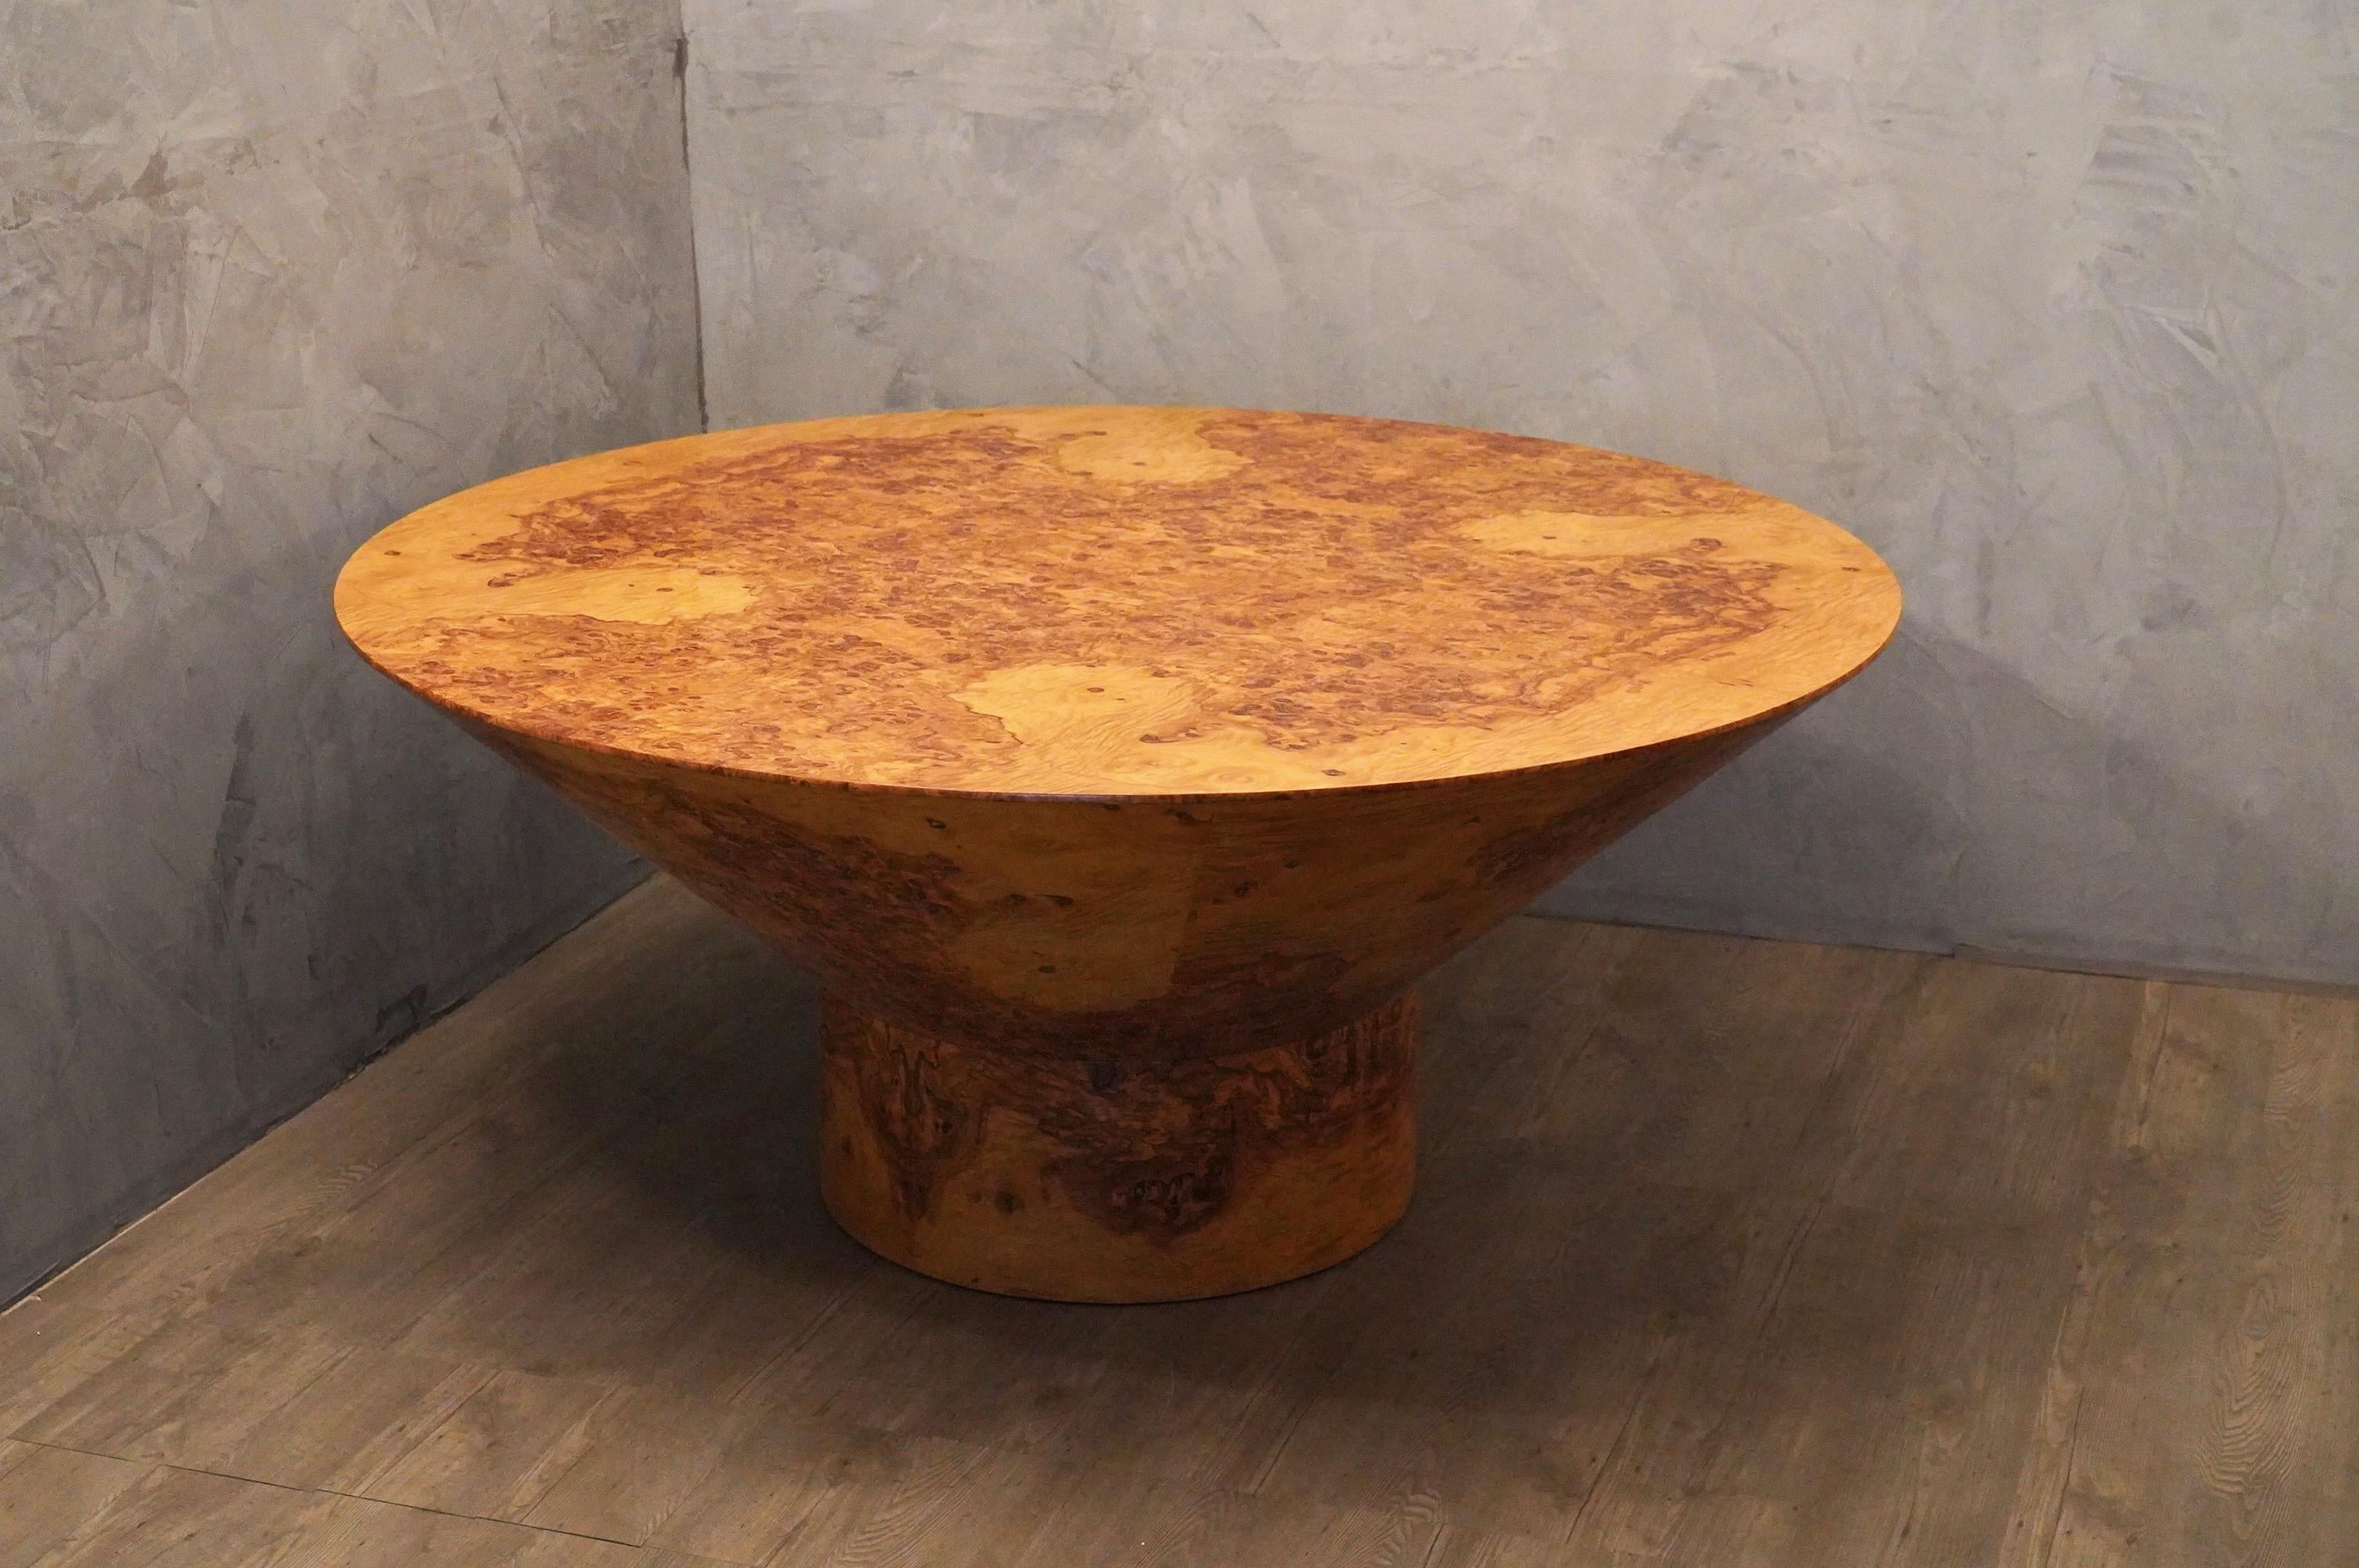 All veneered in root of olive wood, beautiful the effect of the veneer on the top, the burl wood veneer is put like a form a drawing. Very stable and solid, 10/12 people can stay around it comfortably seated.

A particular center table true Work